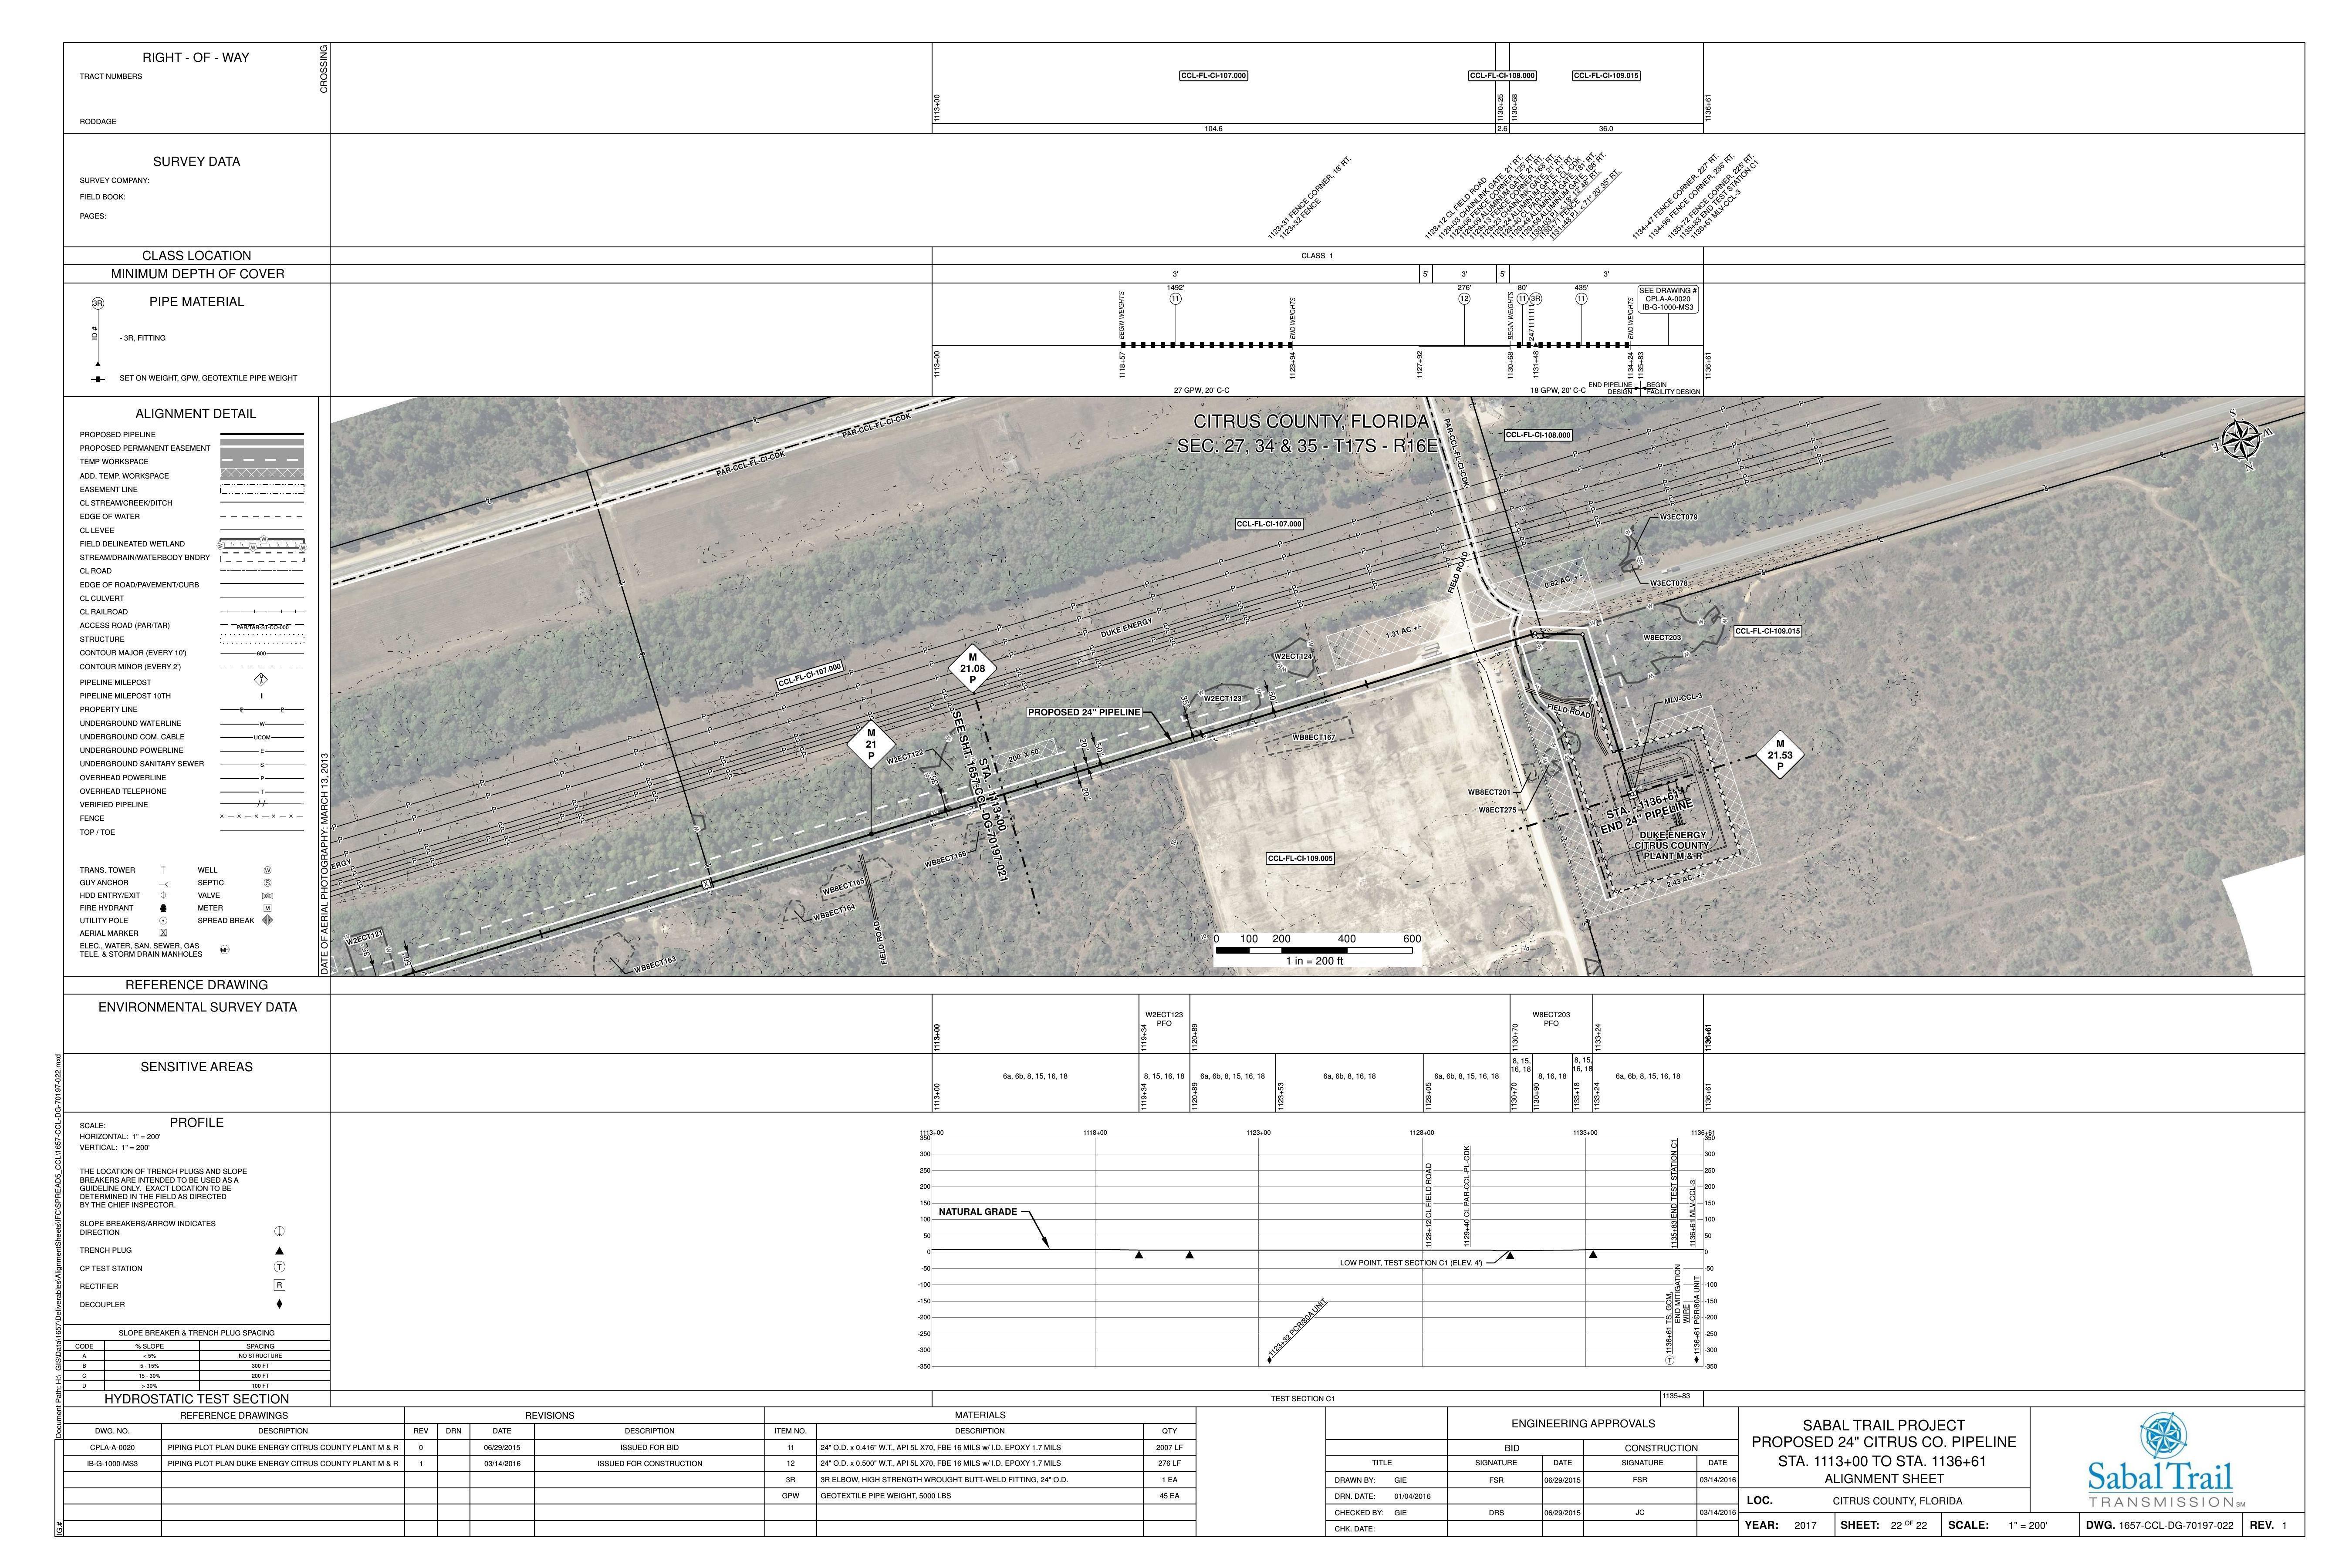 1657-CCL-DG-70197-022, STA. 1113+00 TO STA. 1136+61, END PIPELINE, PLANT M & R, I-10, PIPING PLOT PLAN DUKE ENERGY CITRUS COUNTY PLANT M & R, PROPOSED 24-inch CITRUS CO. PIPELINE, CITRUS COUNTY, CITRUS COUNTY, FLORIDA, 28.963916, -82.669227